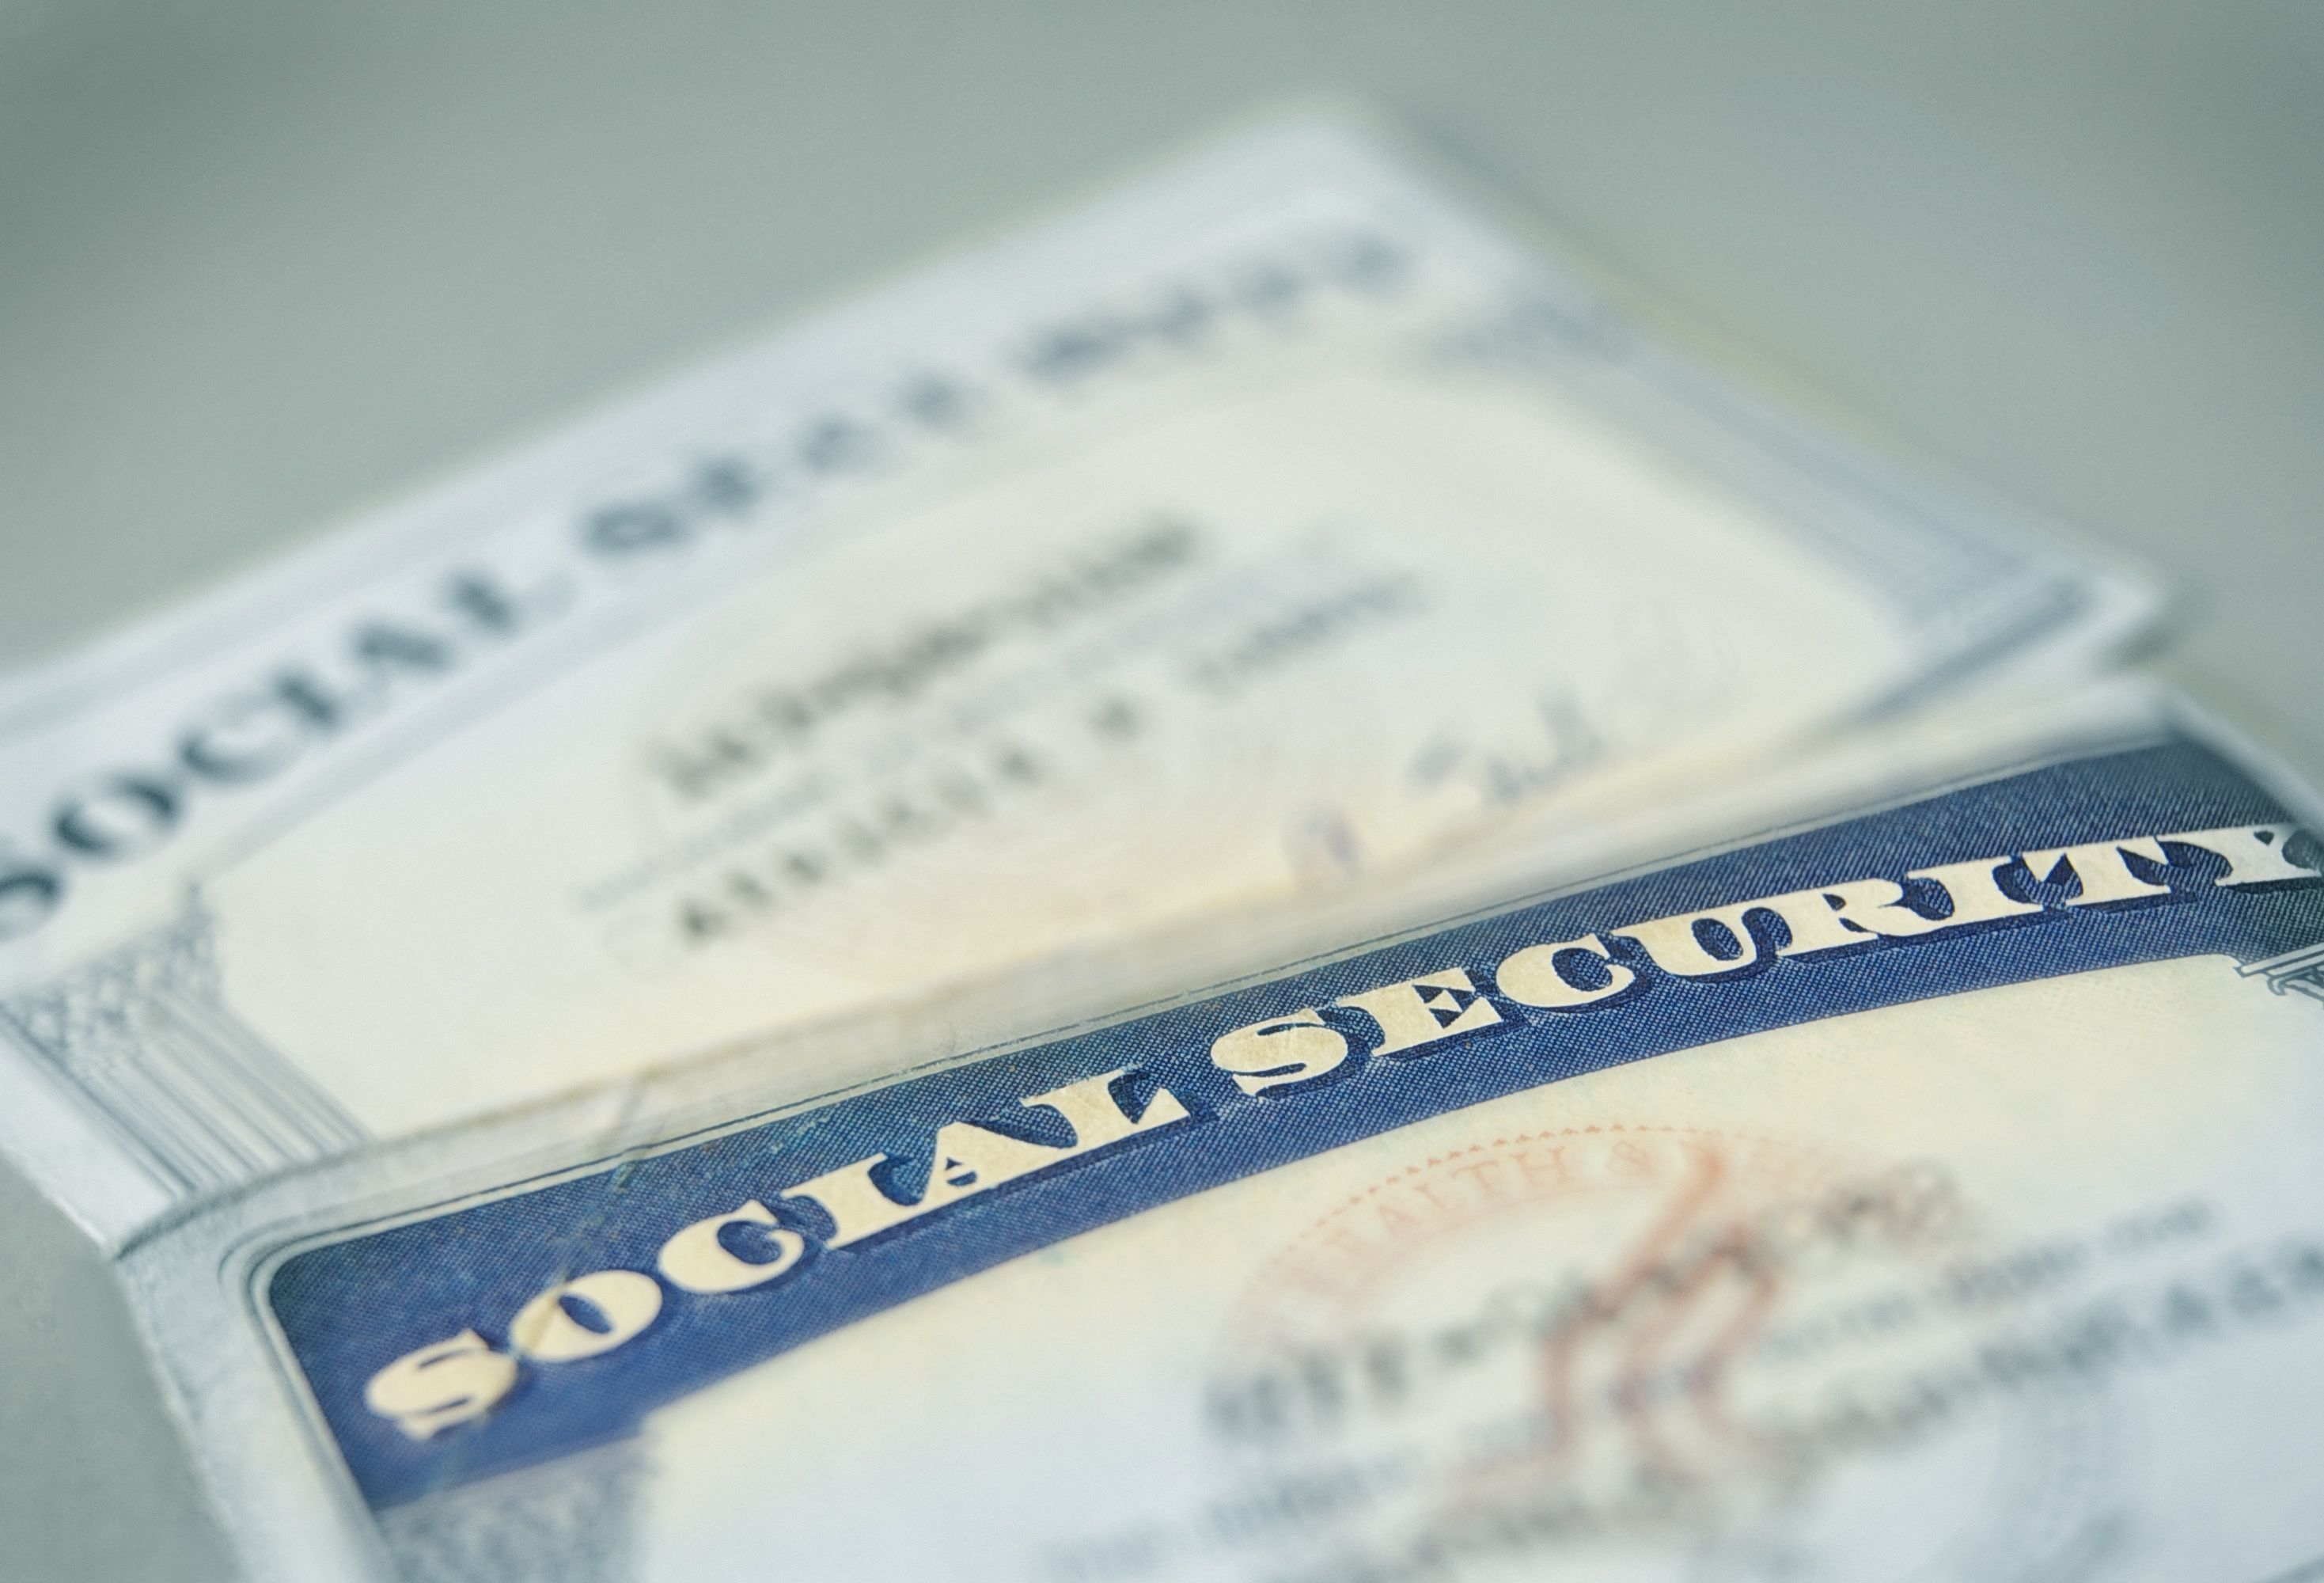 Social Security will not be able to pay full benefits in 2034 if